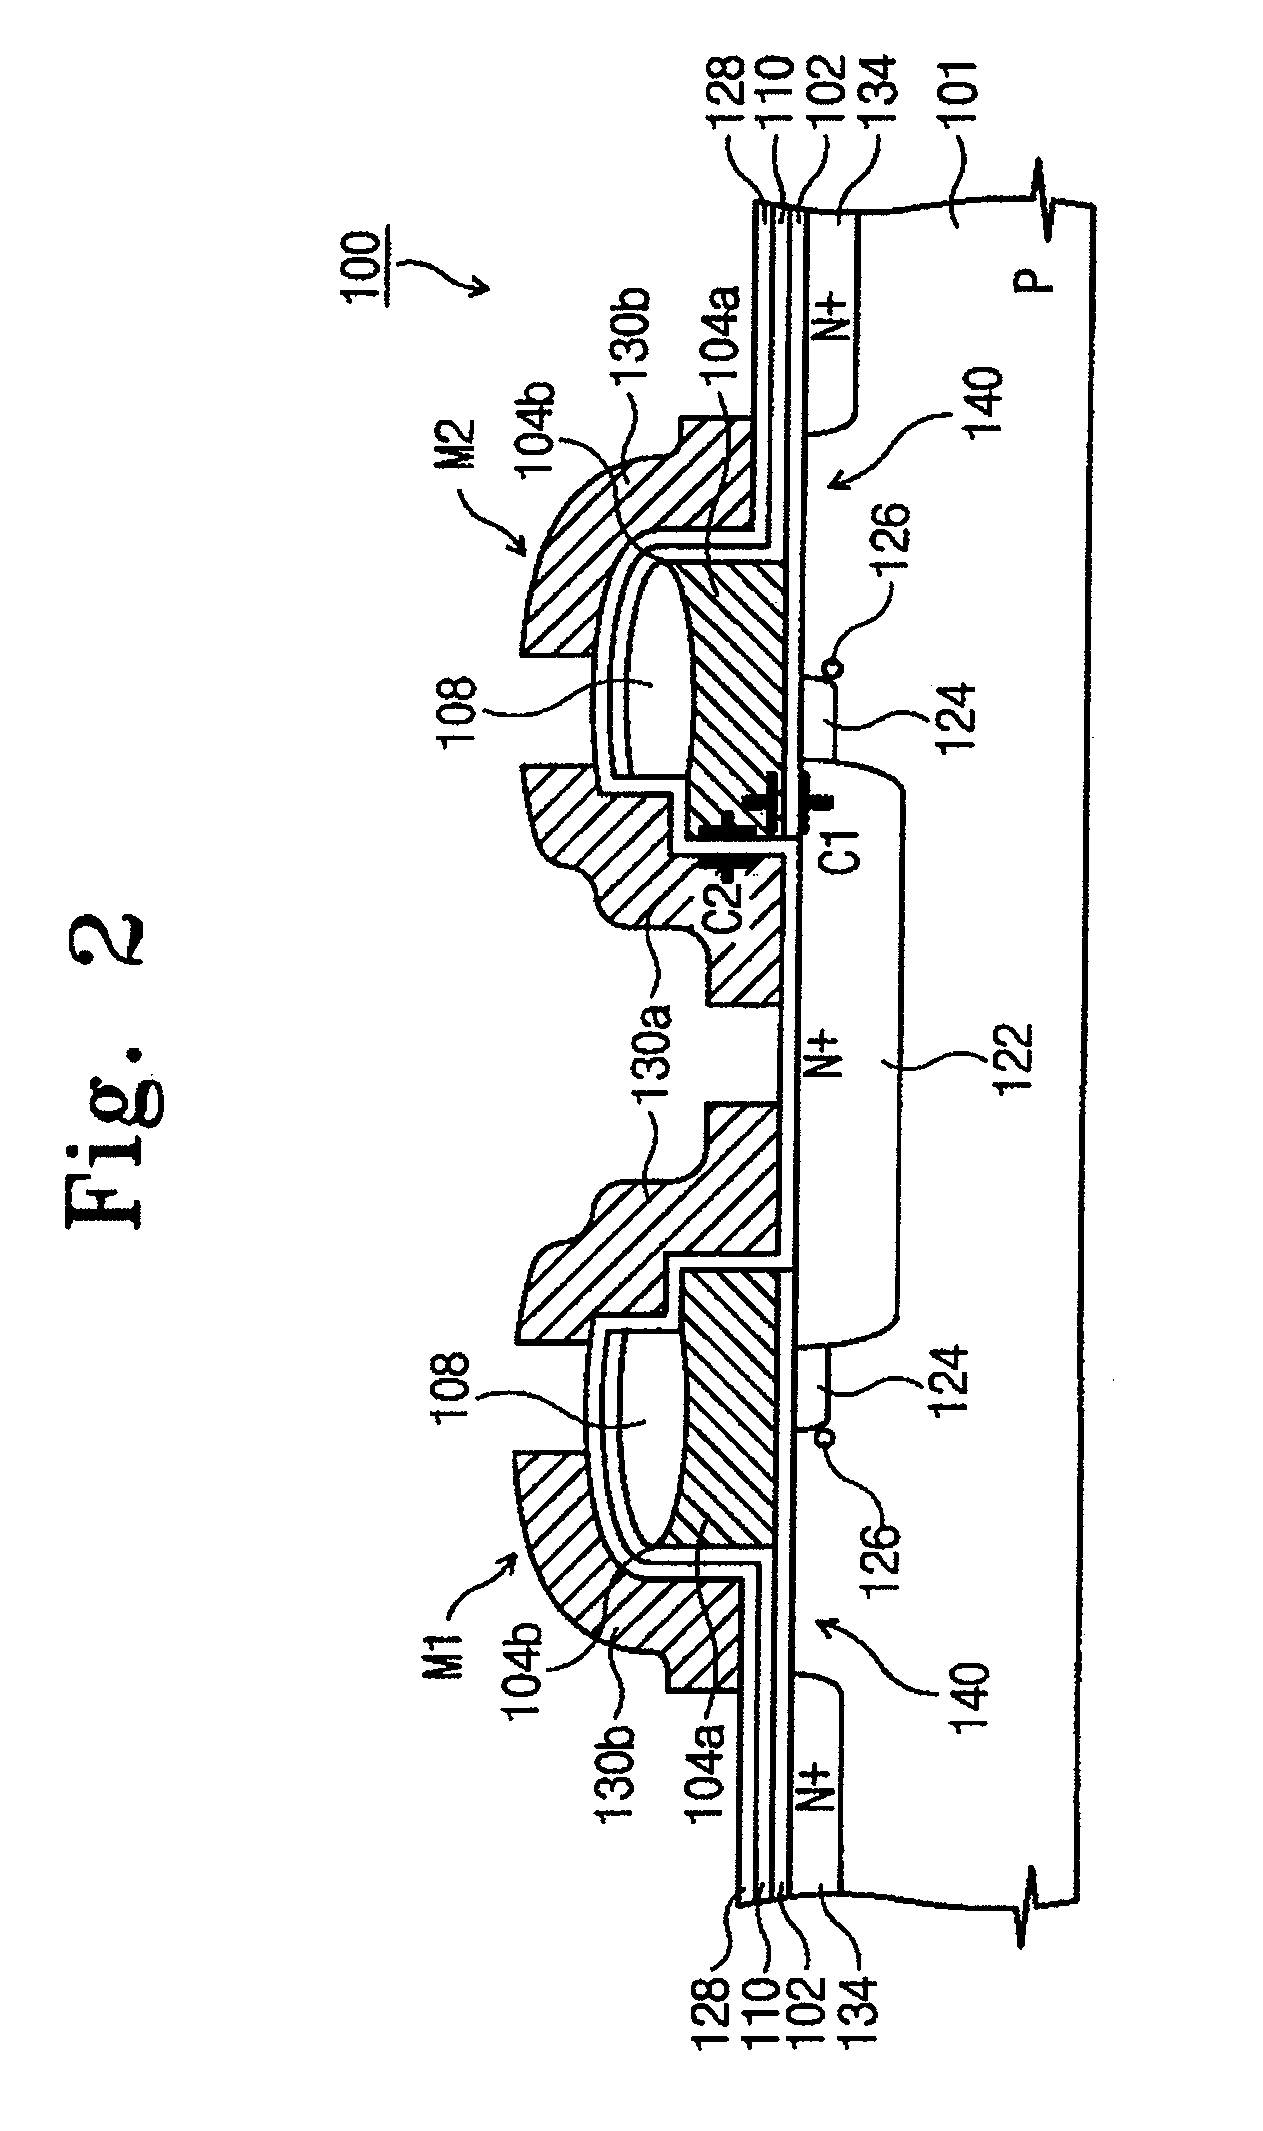 Split gate non-volatile memory devices and methods of forming the same